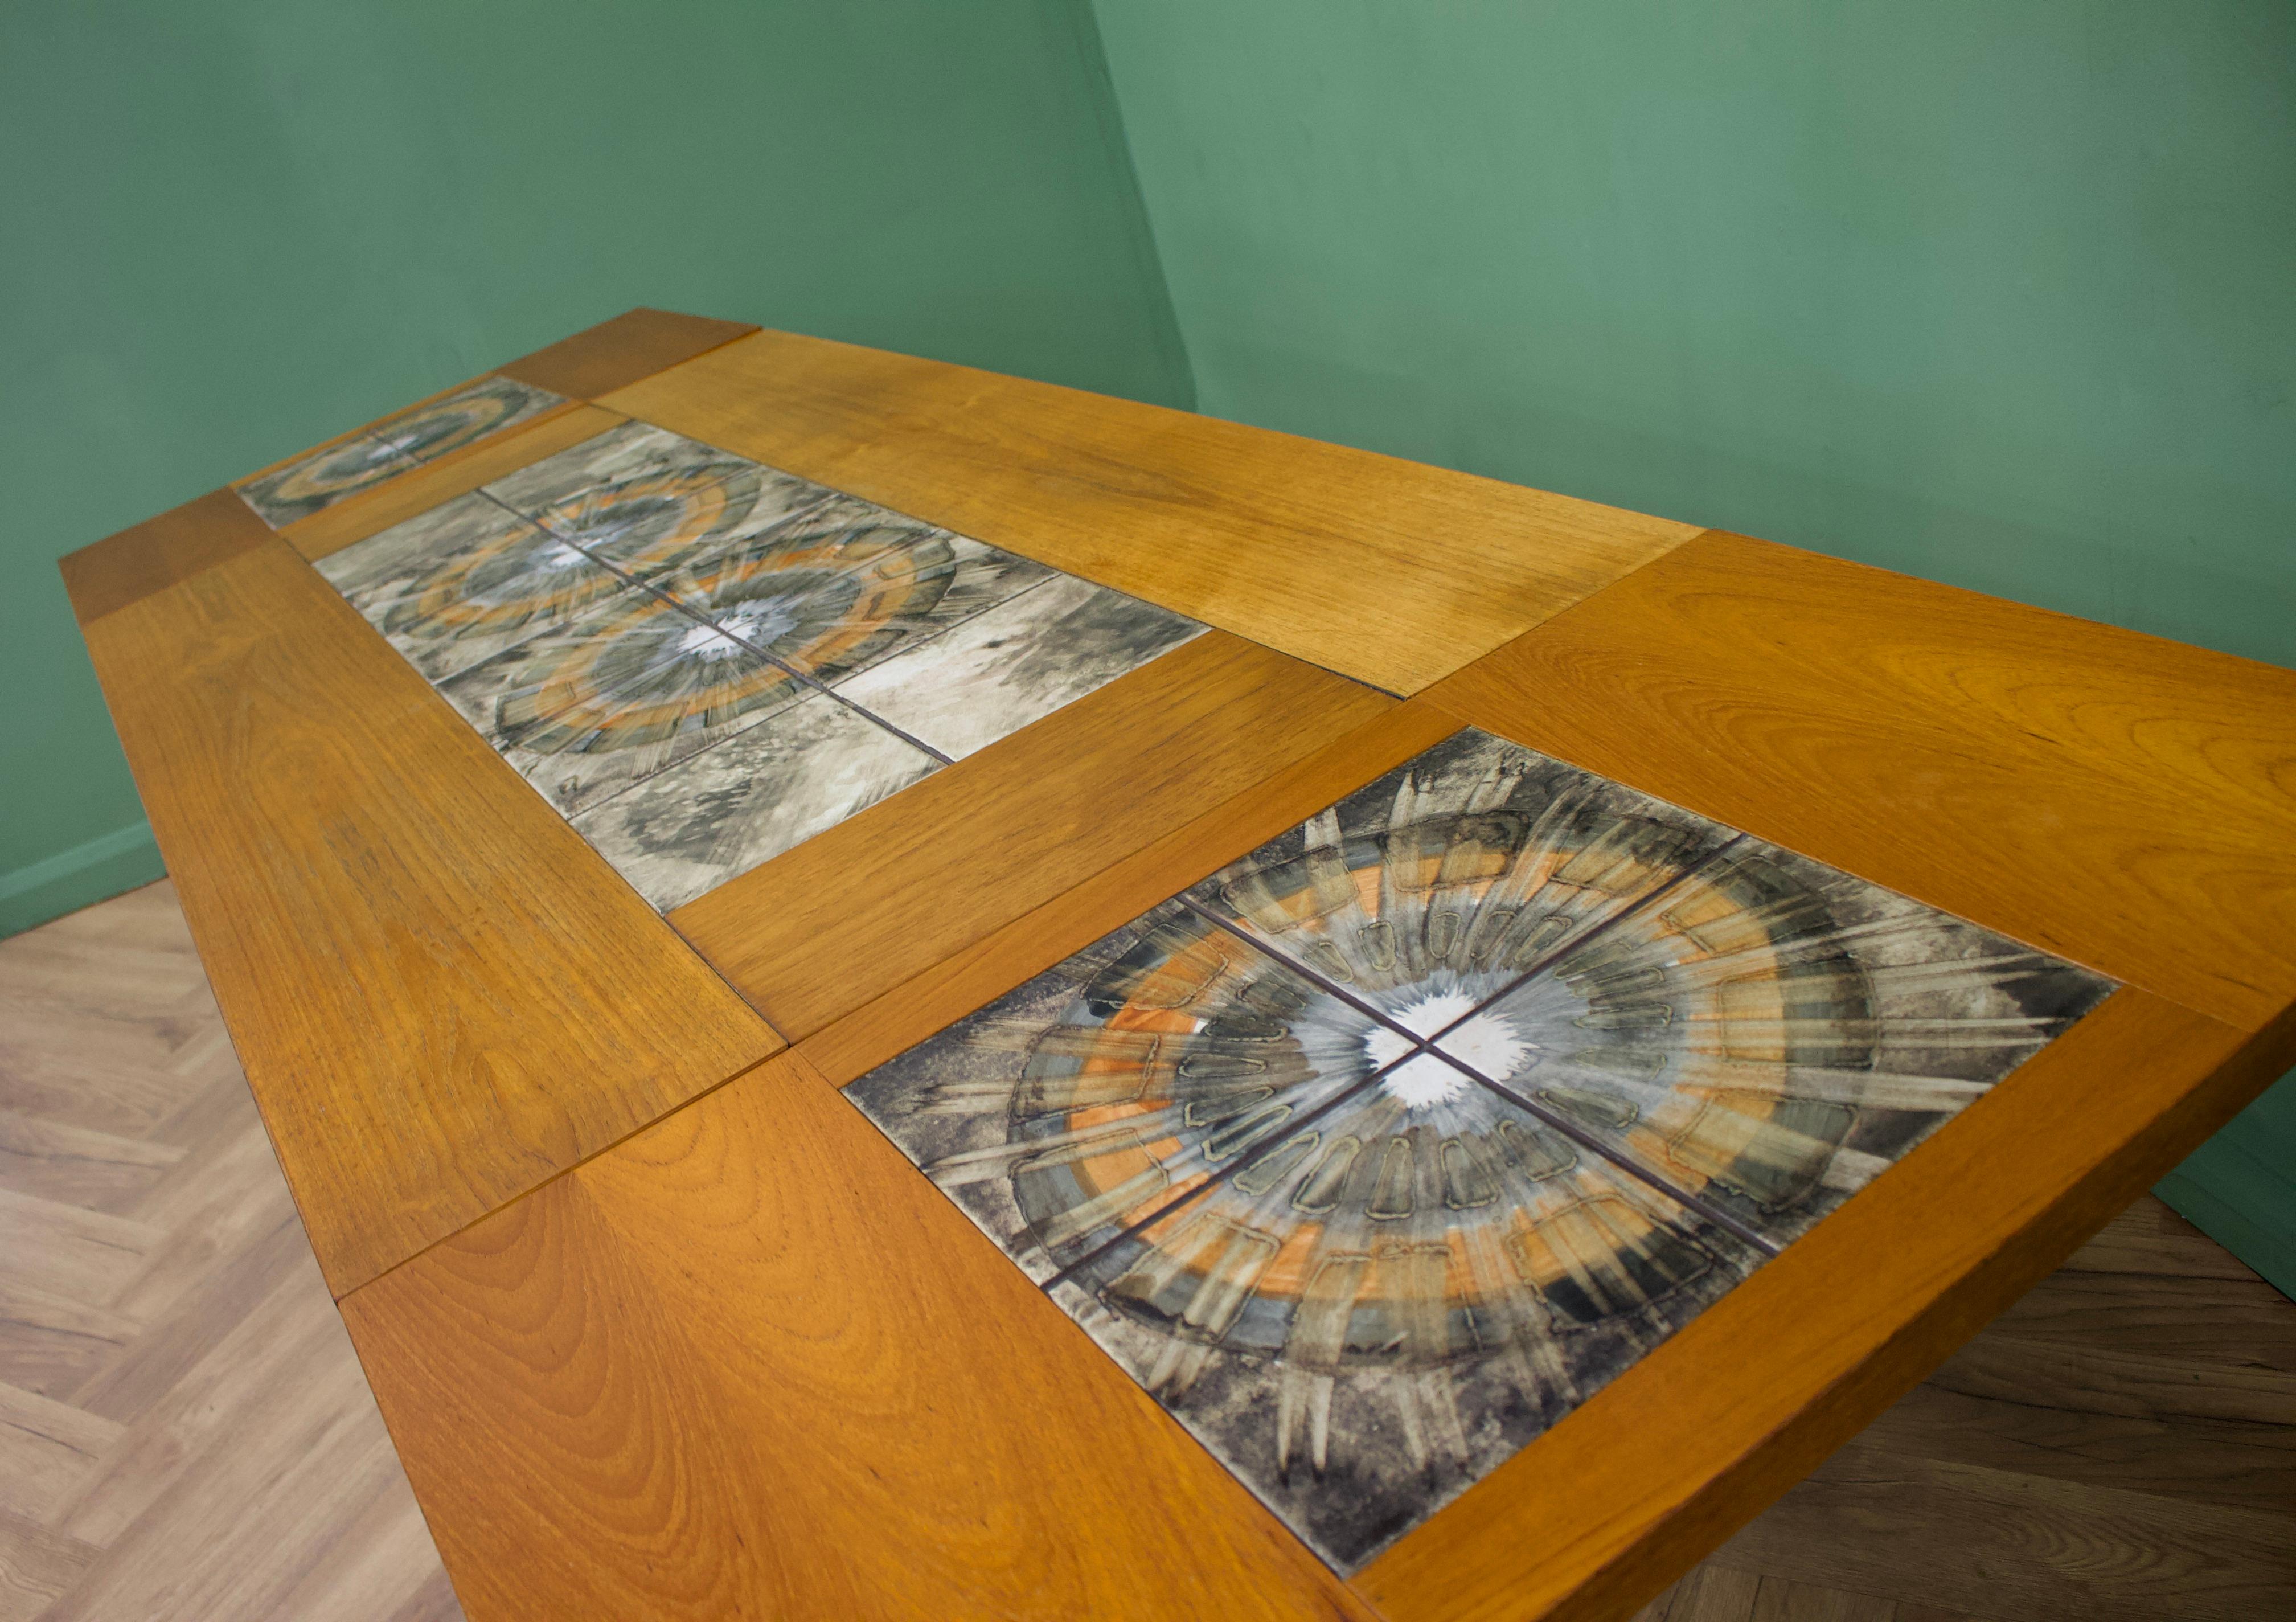 Mid Century Danish Teak Tiled Extendable Dining Table from Gangso Mobler In Good Condition For Sale In South Shields, GB